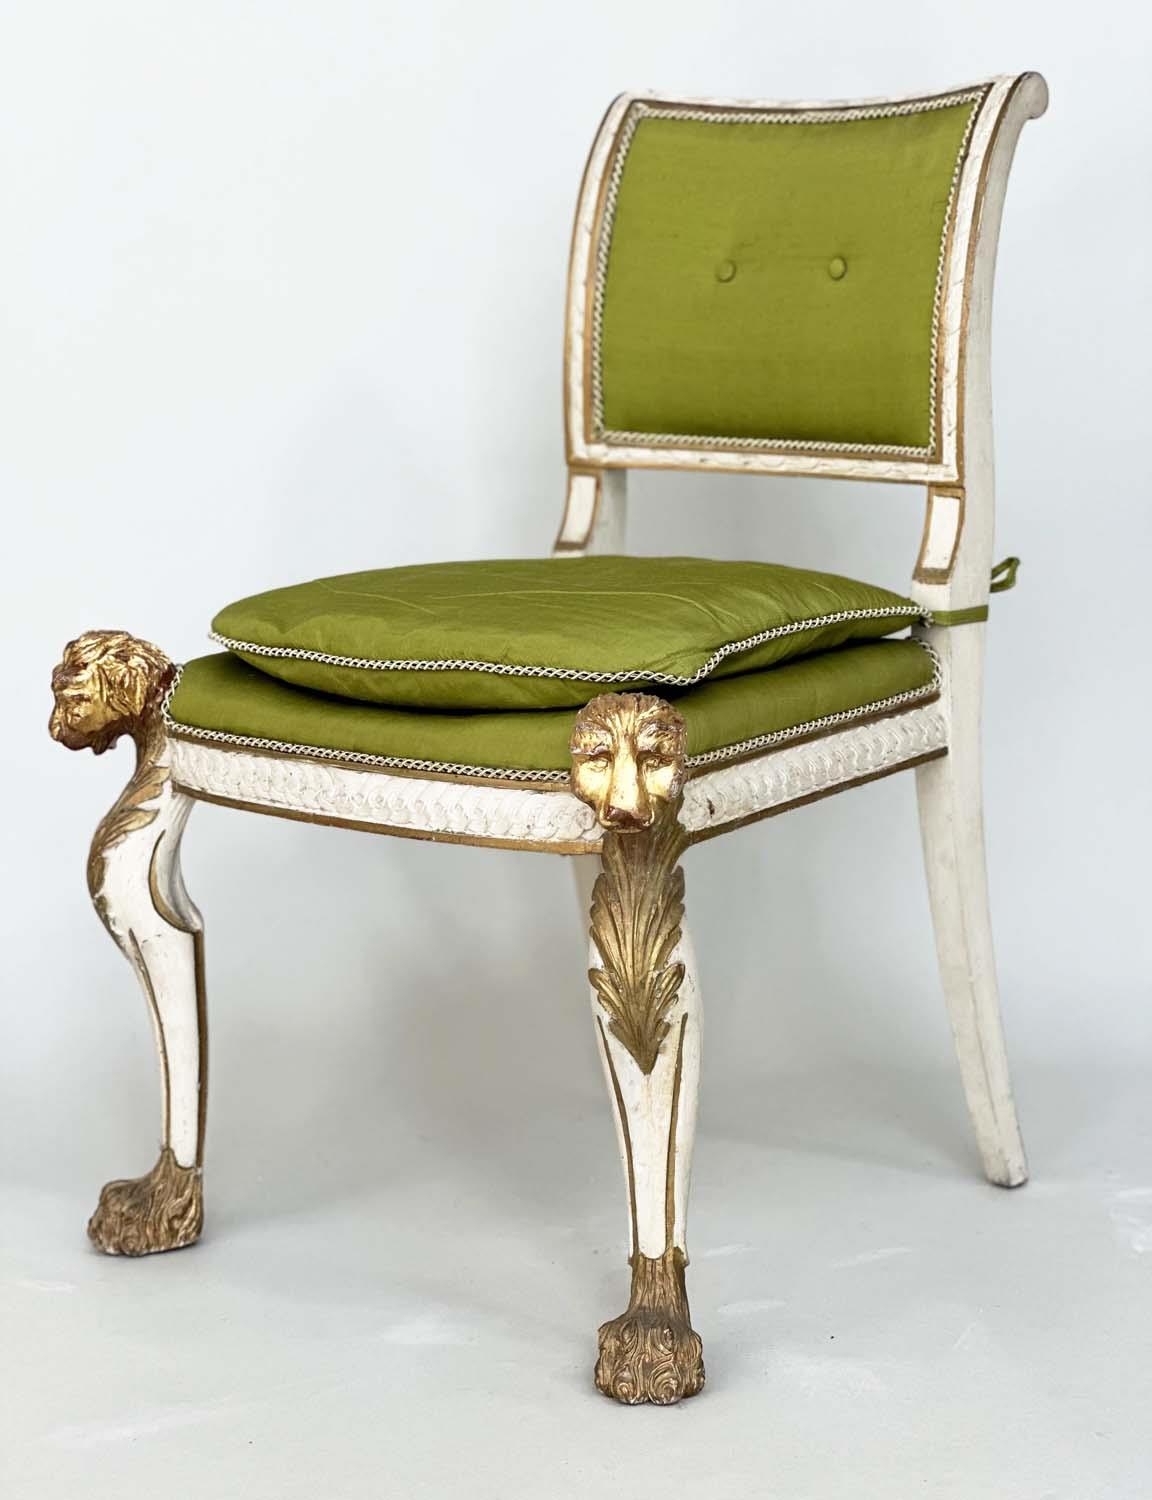 SIDE CHAIRS, a pair, English Country House, early 19th century grey painted and parcel gilt with - Image 11 of 15